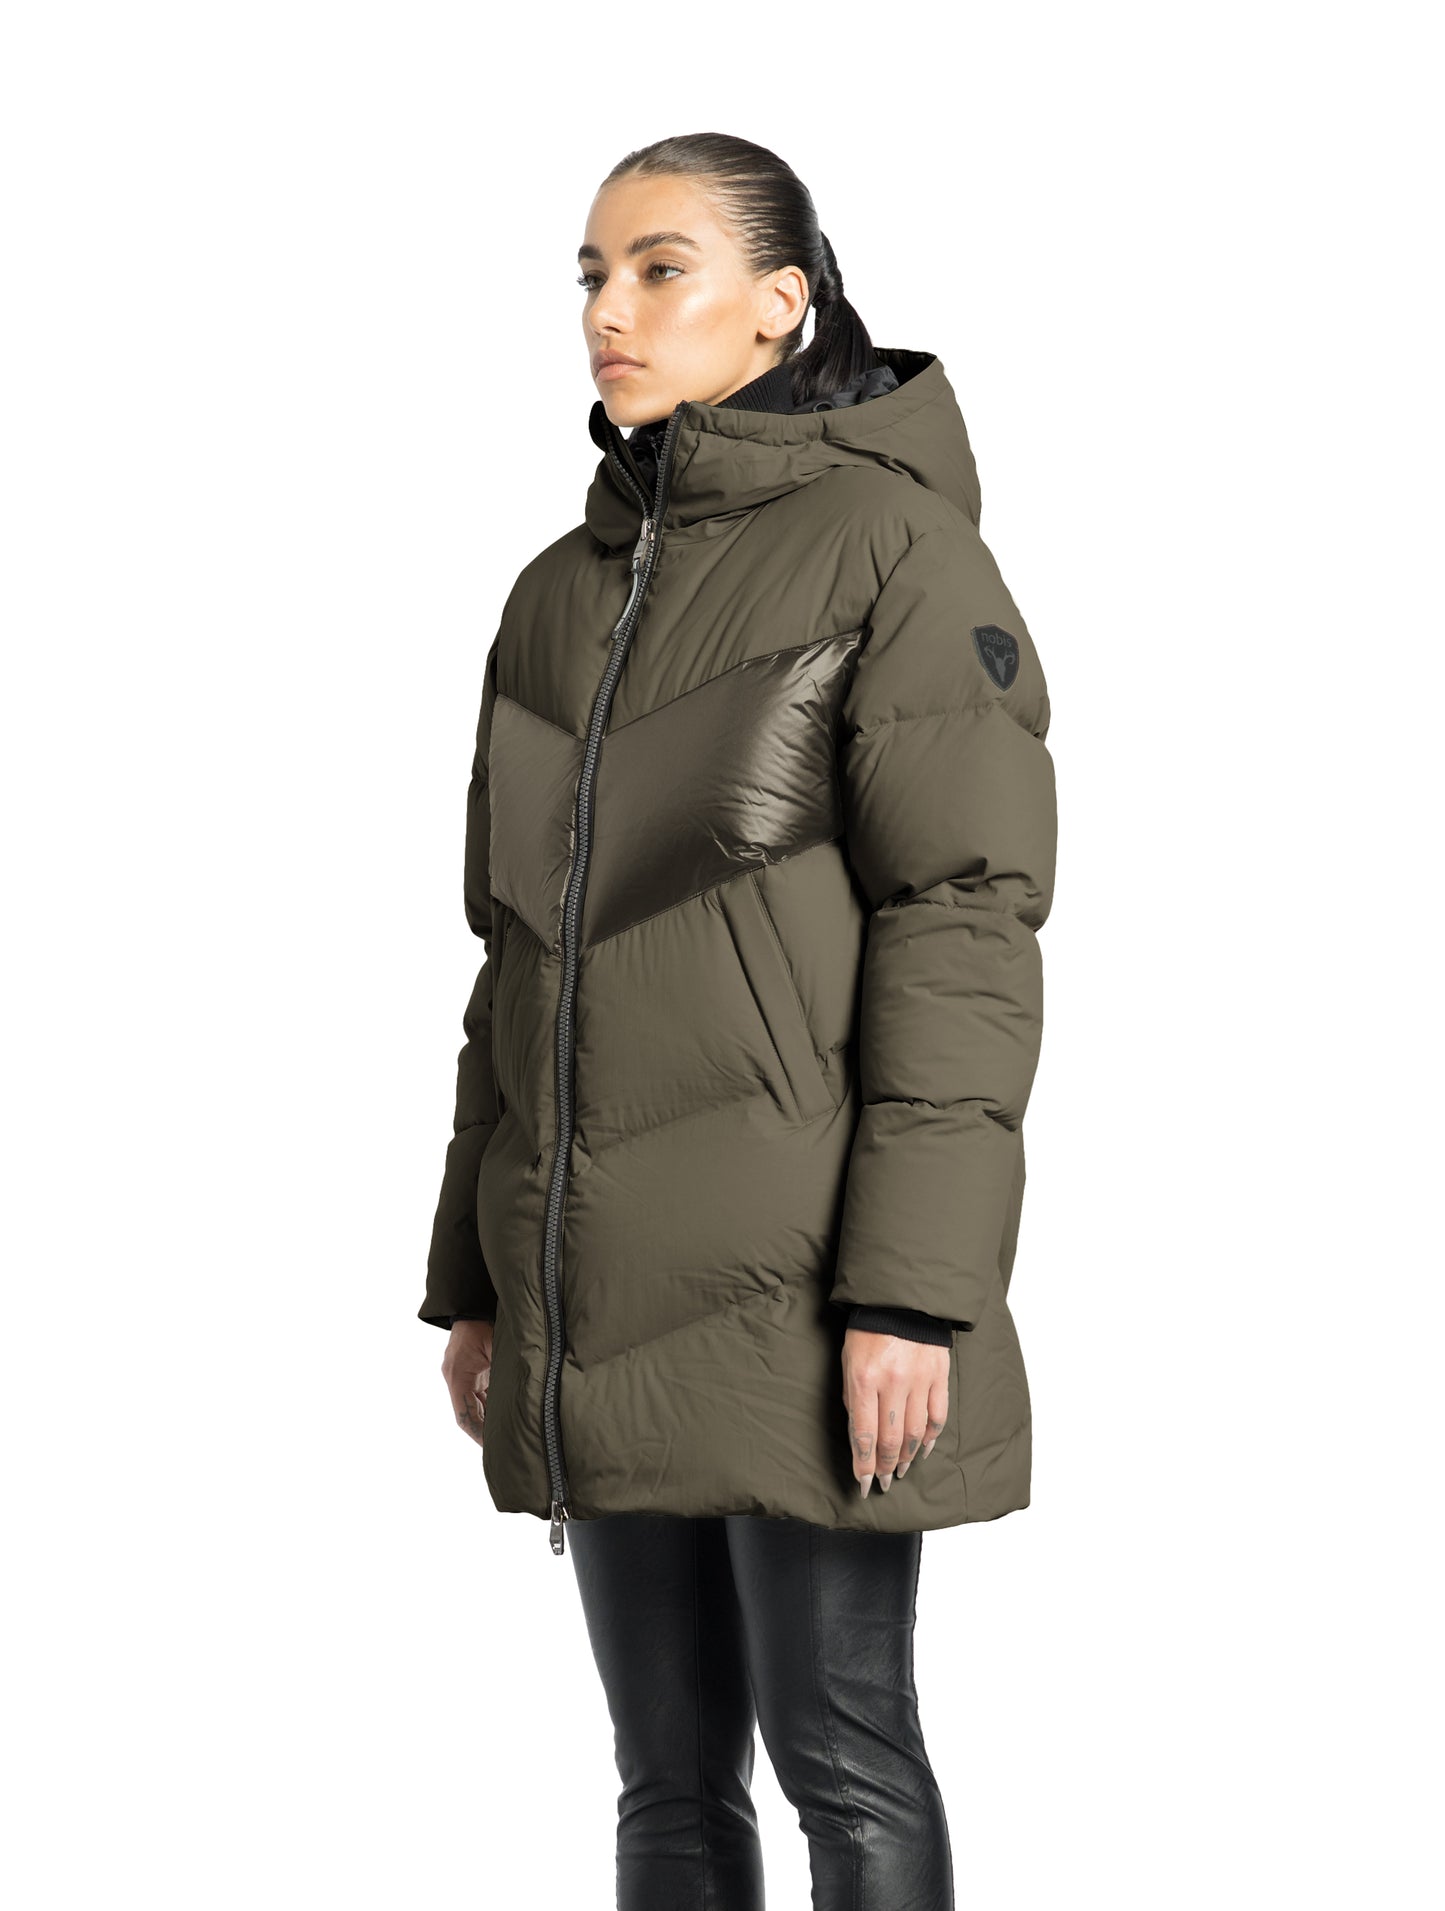 Isla Women's Chevron Quilted Puffer Jacket in thigh length, premium technical nylon taffeta fabrication, Premium Canadian origin White Duck Down insulation, non-removable down-filled hood, two-way centre-front zipper, zipper pockets at waist, contrast cire technical nylon taffeta detailing on chest and back, in Fatigue